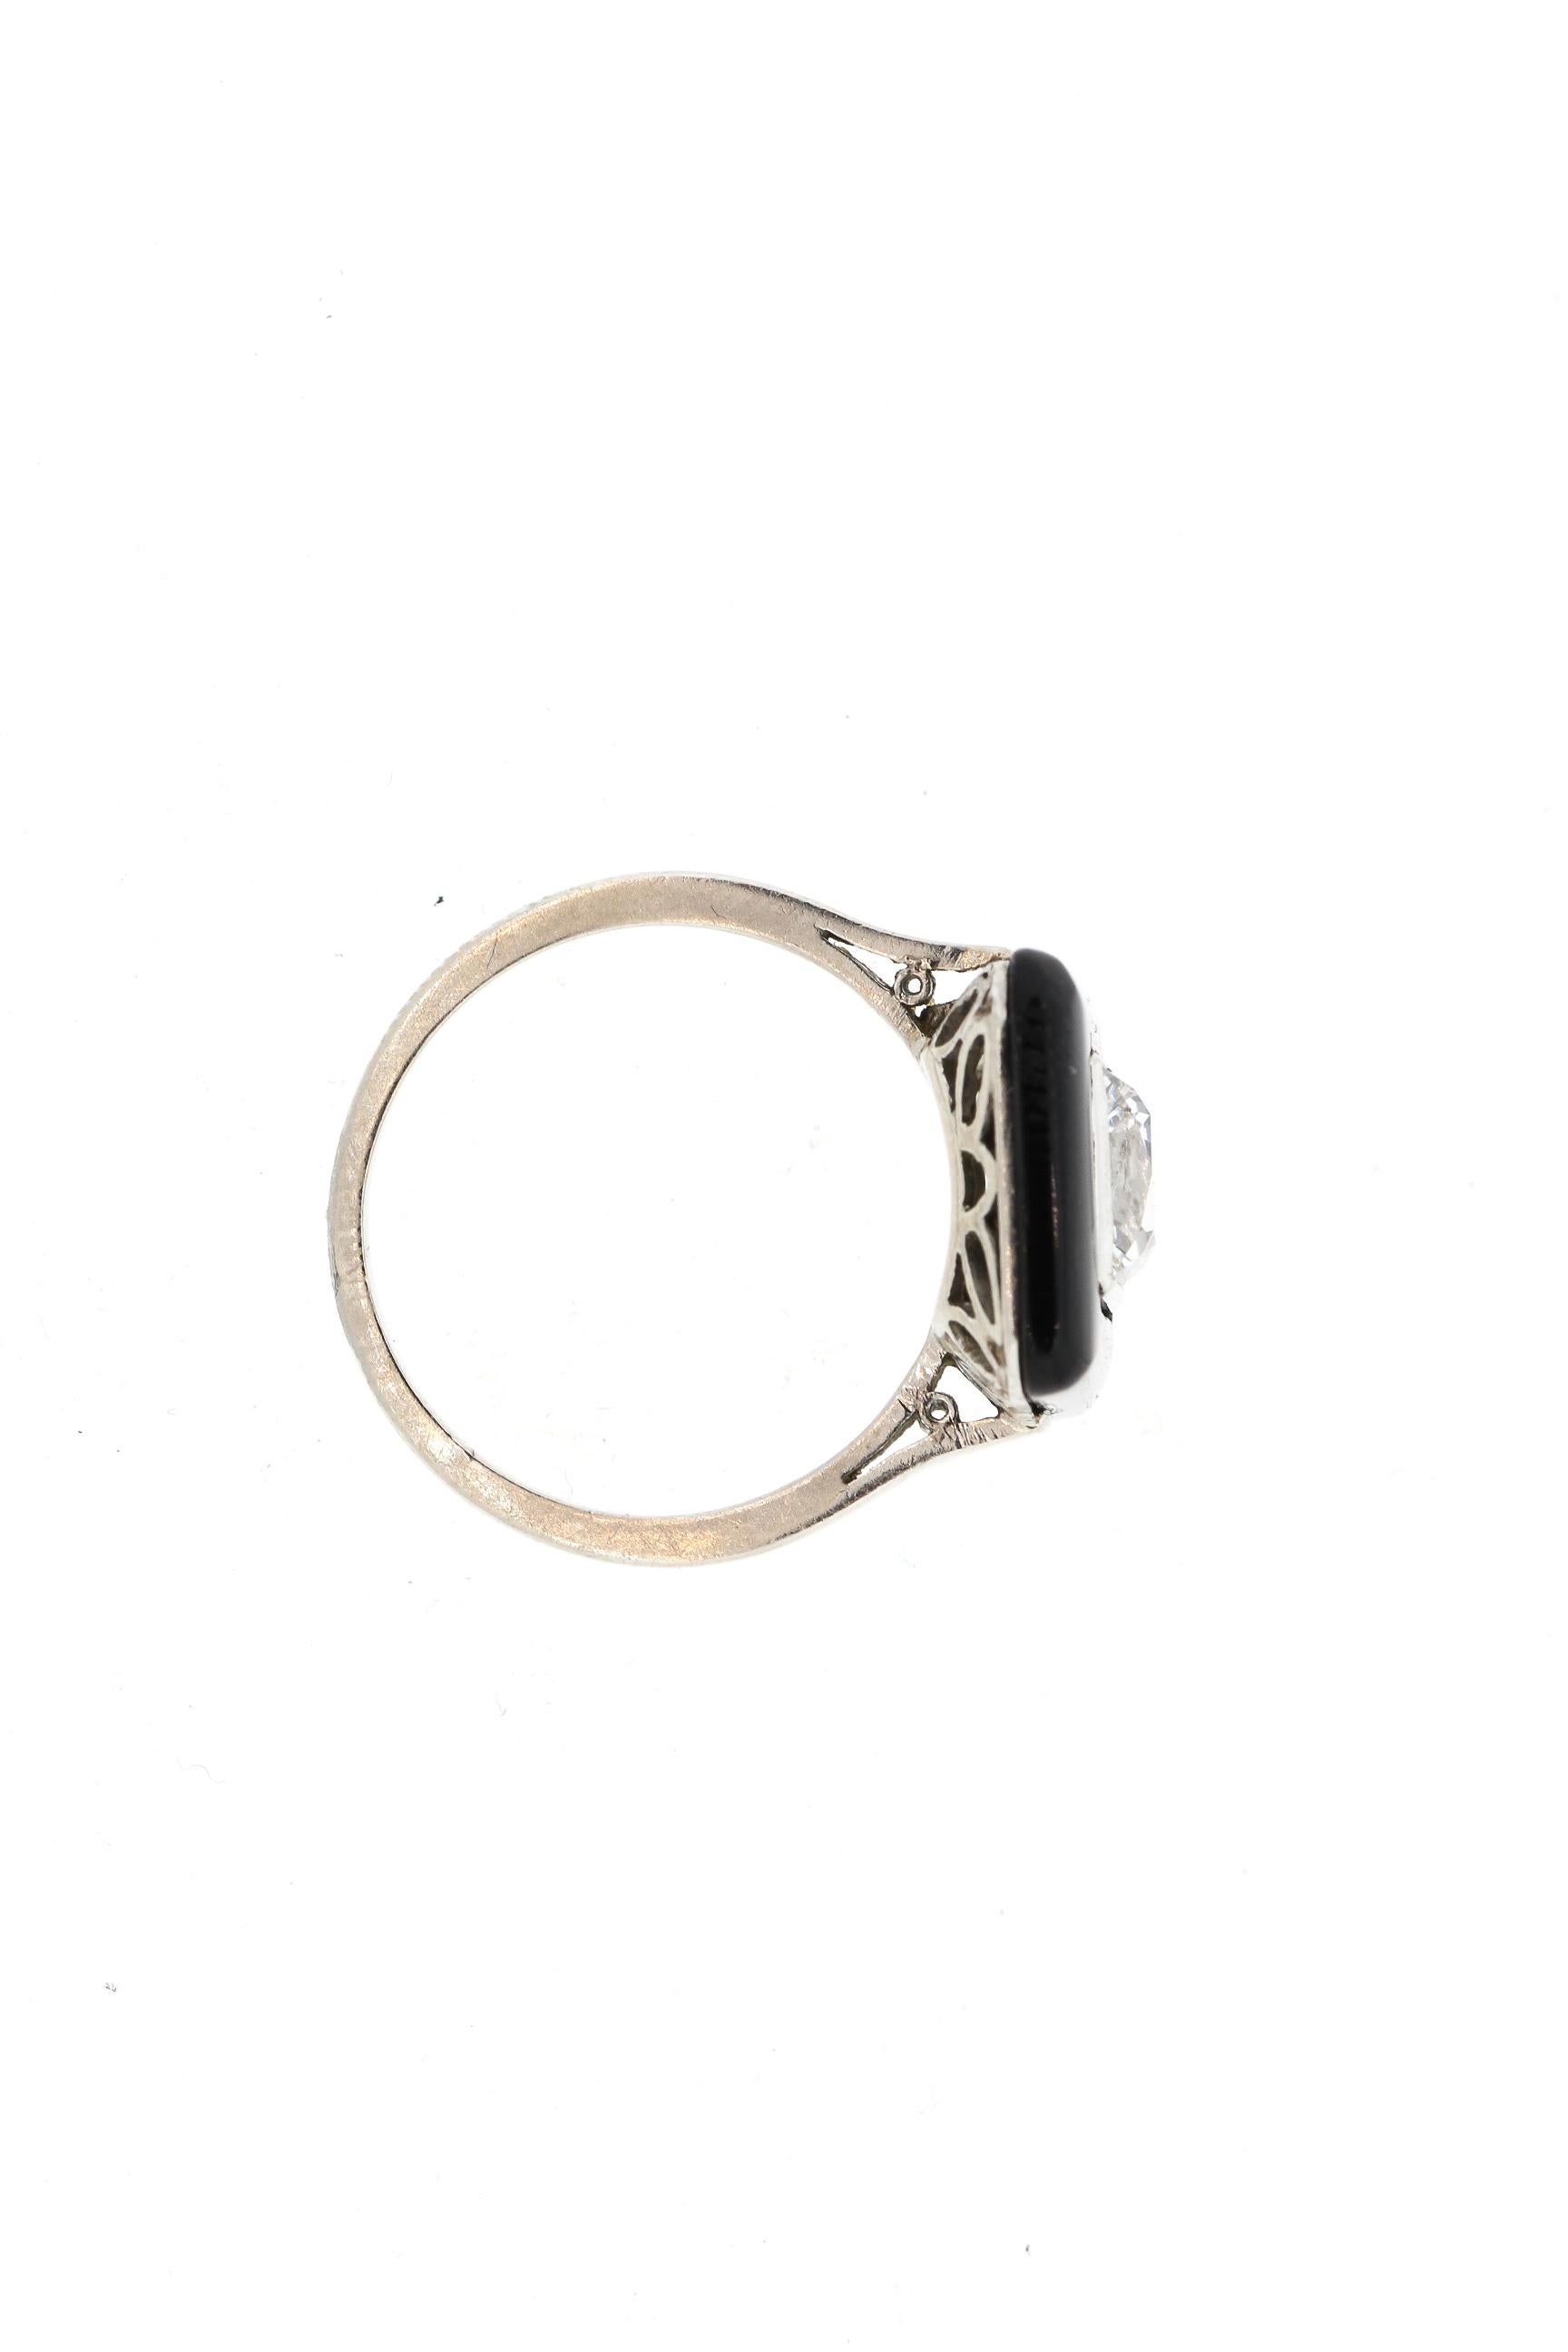 A rare single large French cut diamond surrounded by a table cut onyx frame set in platinum with French hallmarks. This gorgeous ring is set with a French cut diamond weighing approximately 1.05 carats that is estimated to be an E to F color and VVS